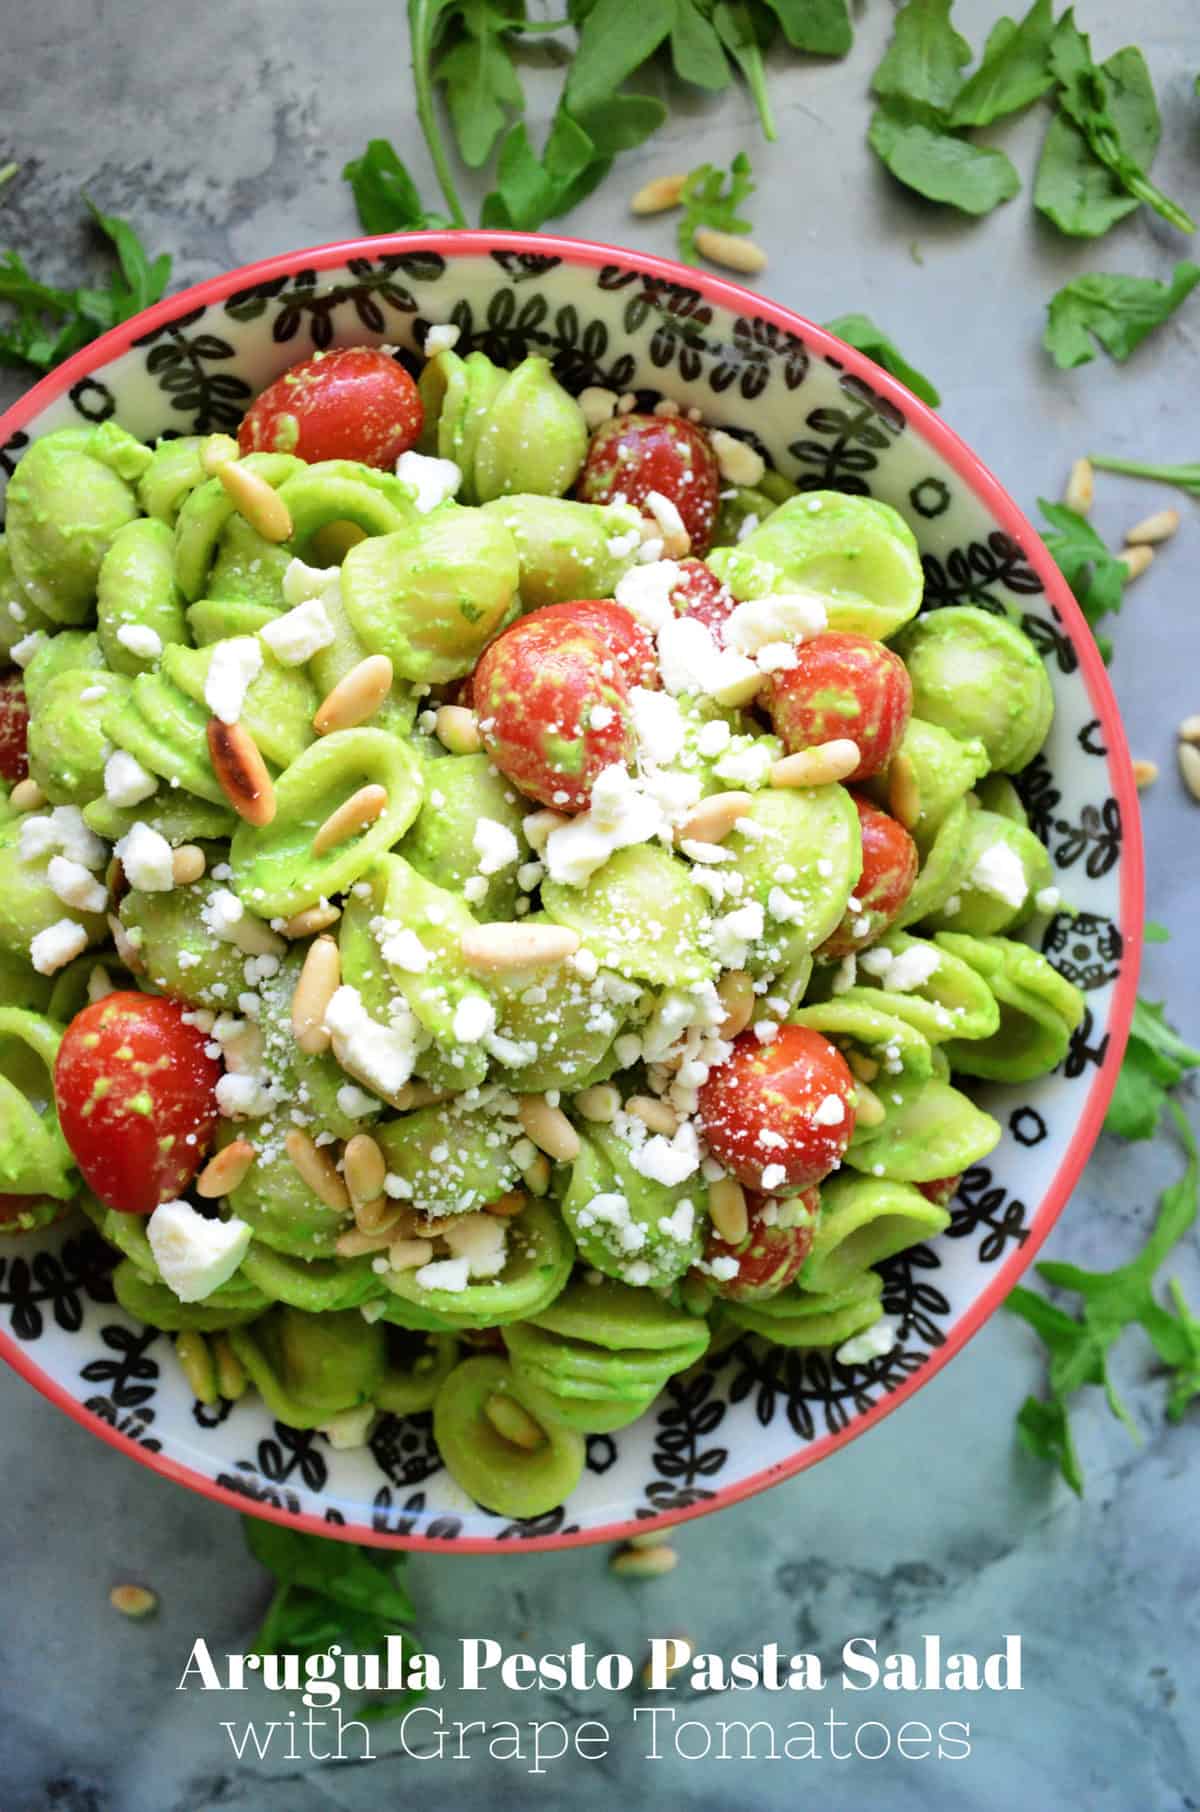 Arugula Pesto Pasta Salad with Grape Tomatoes with pinterest title text.